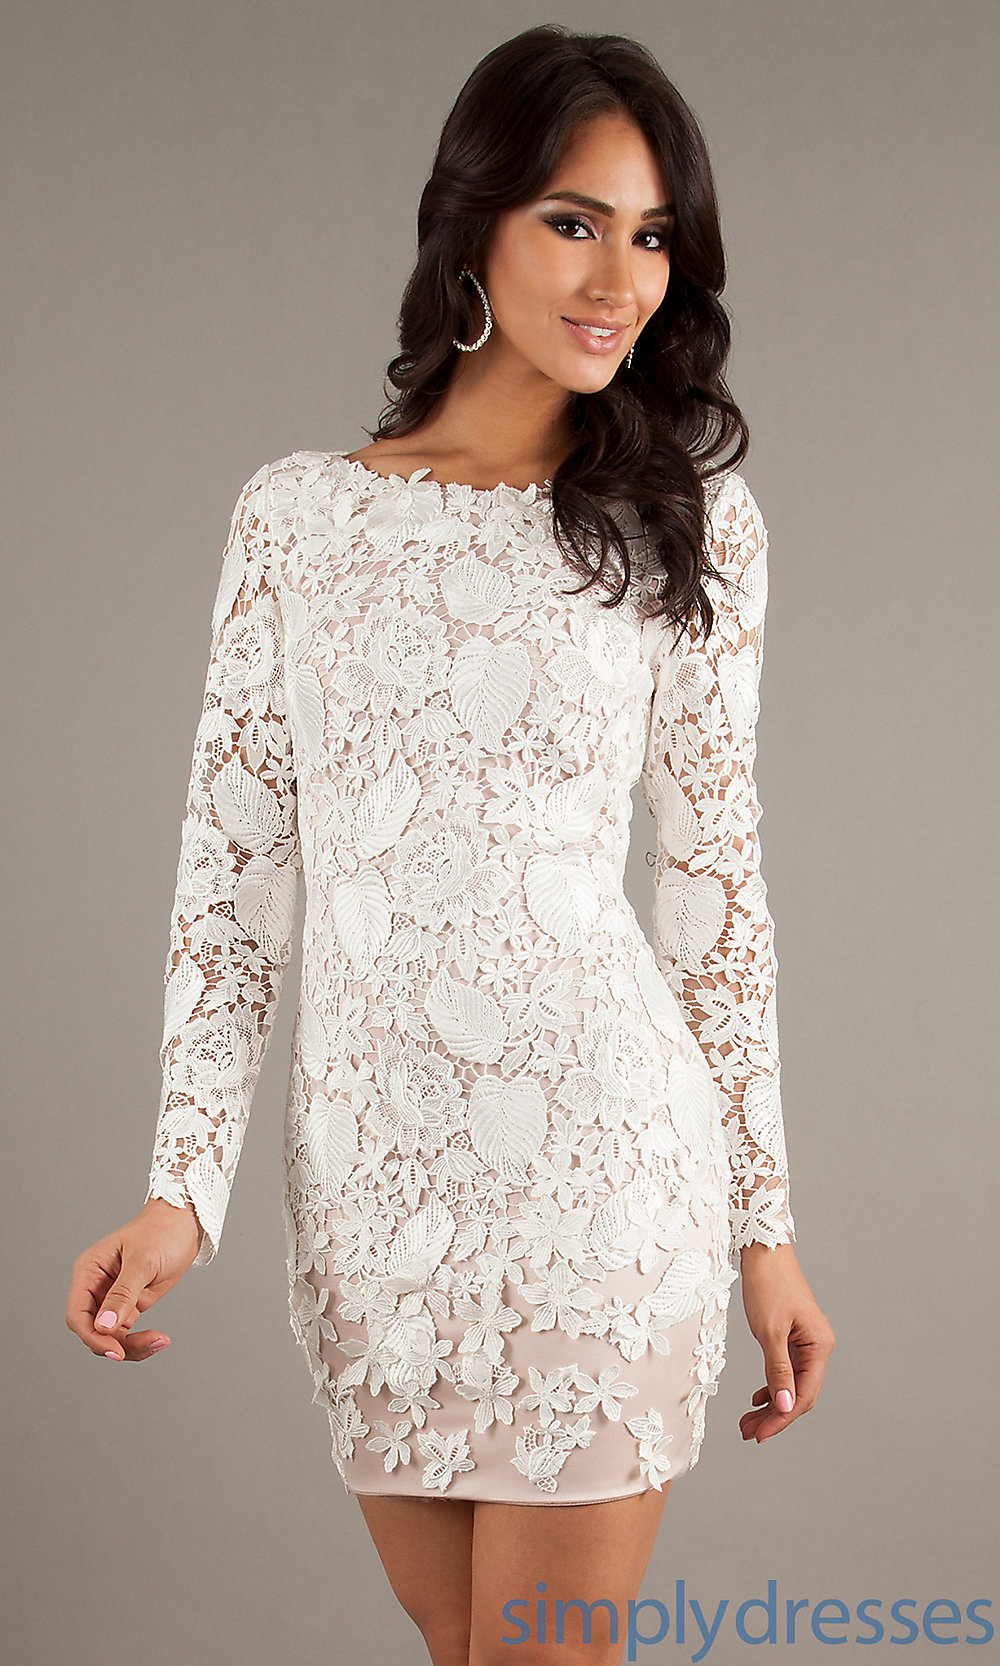 White Lace Dress Womens - 35+ Images 2017-2018